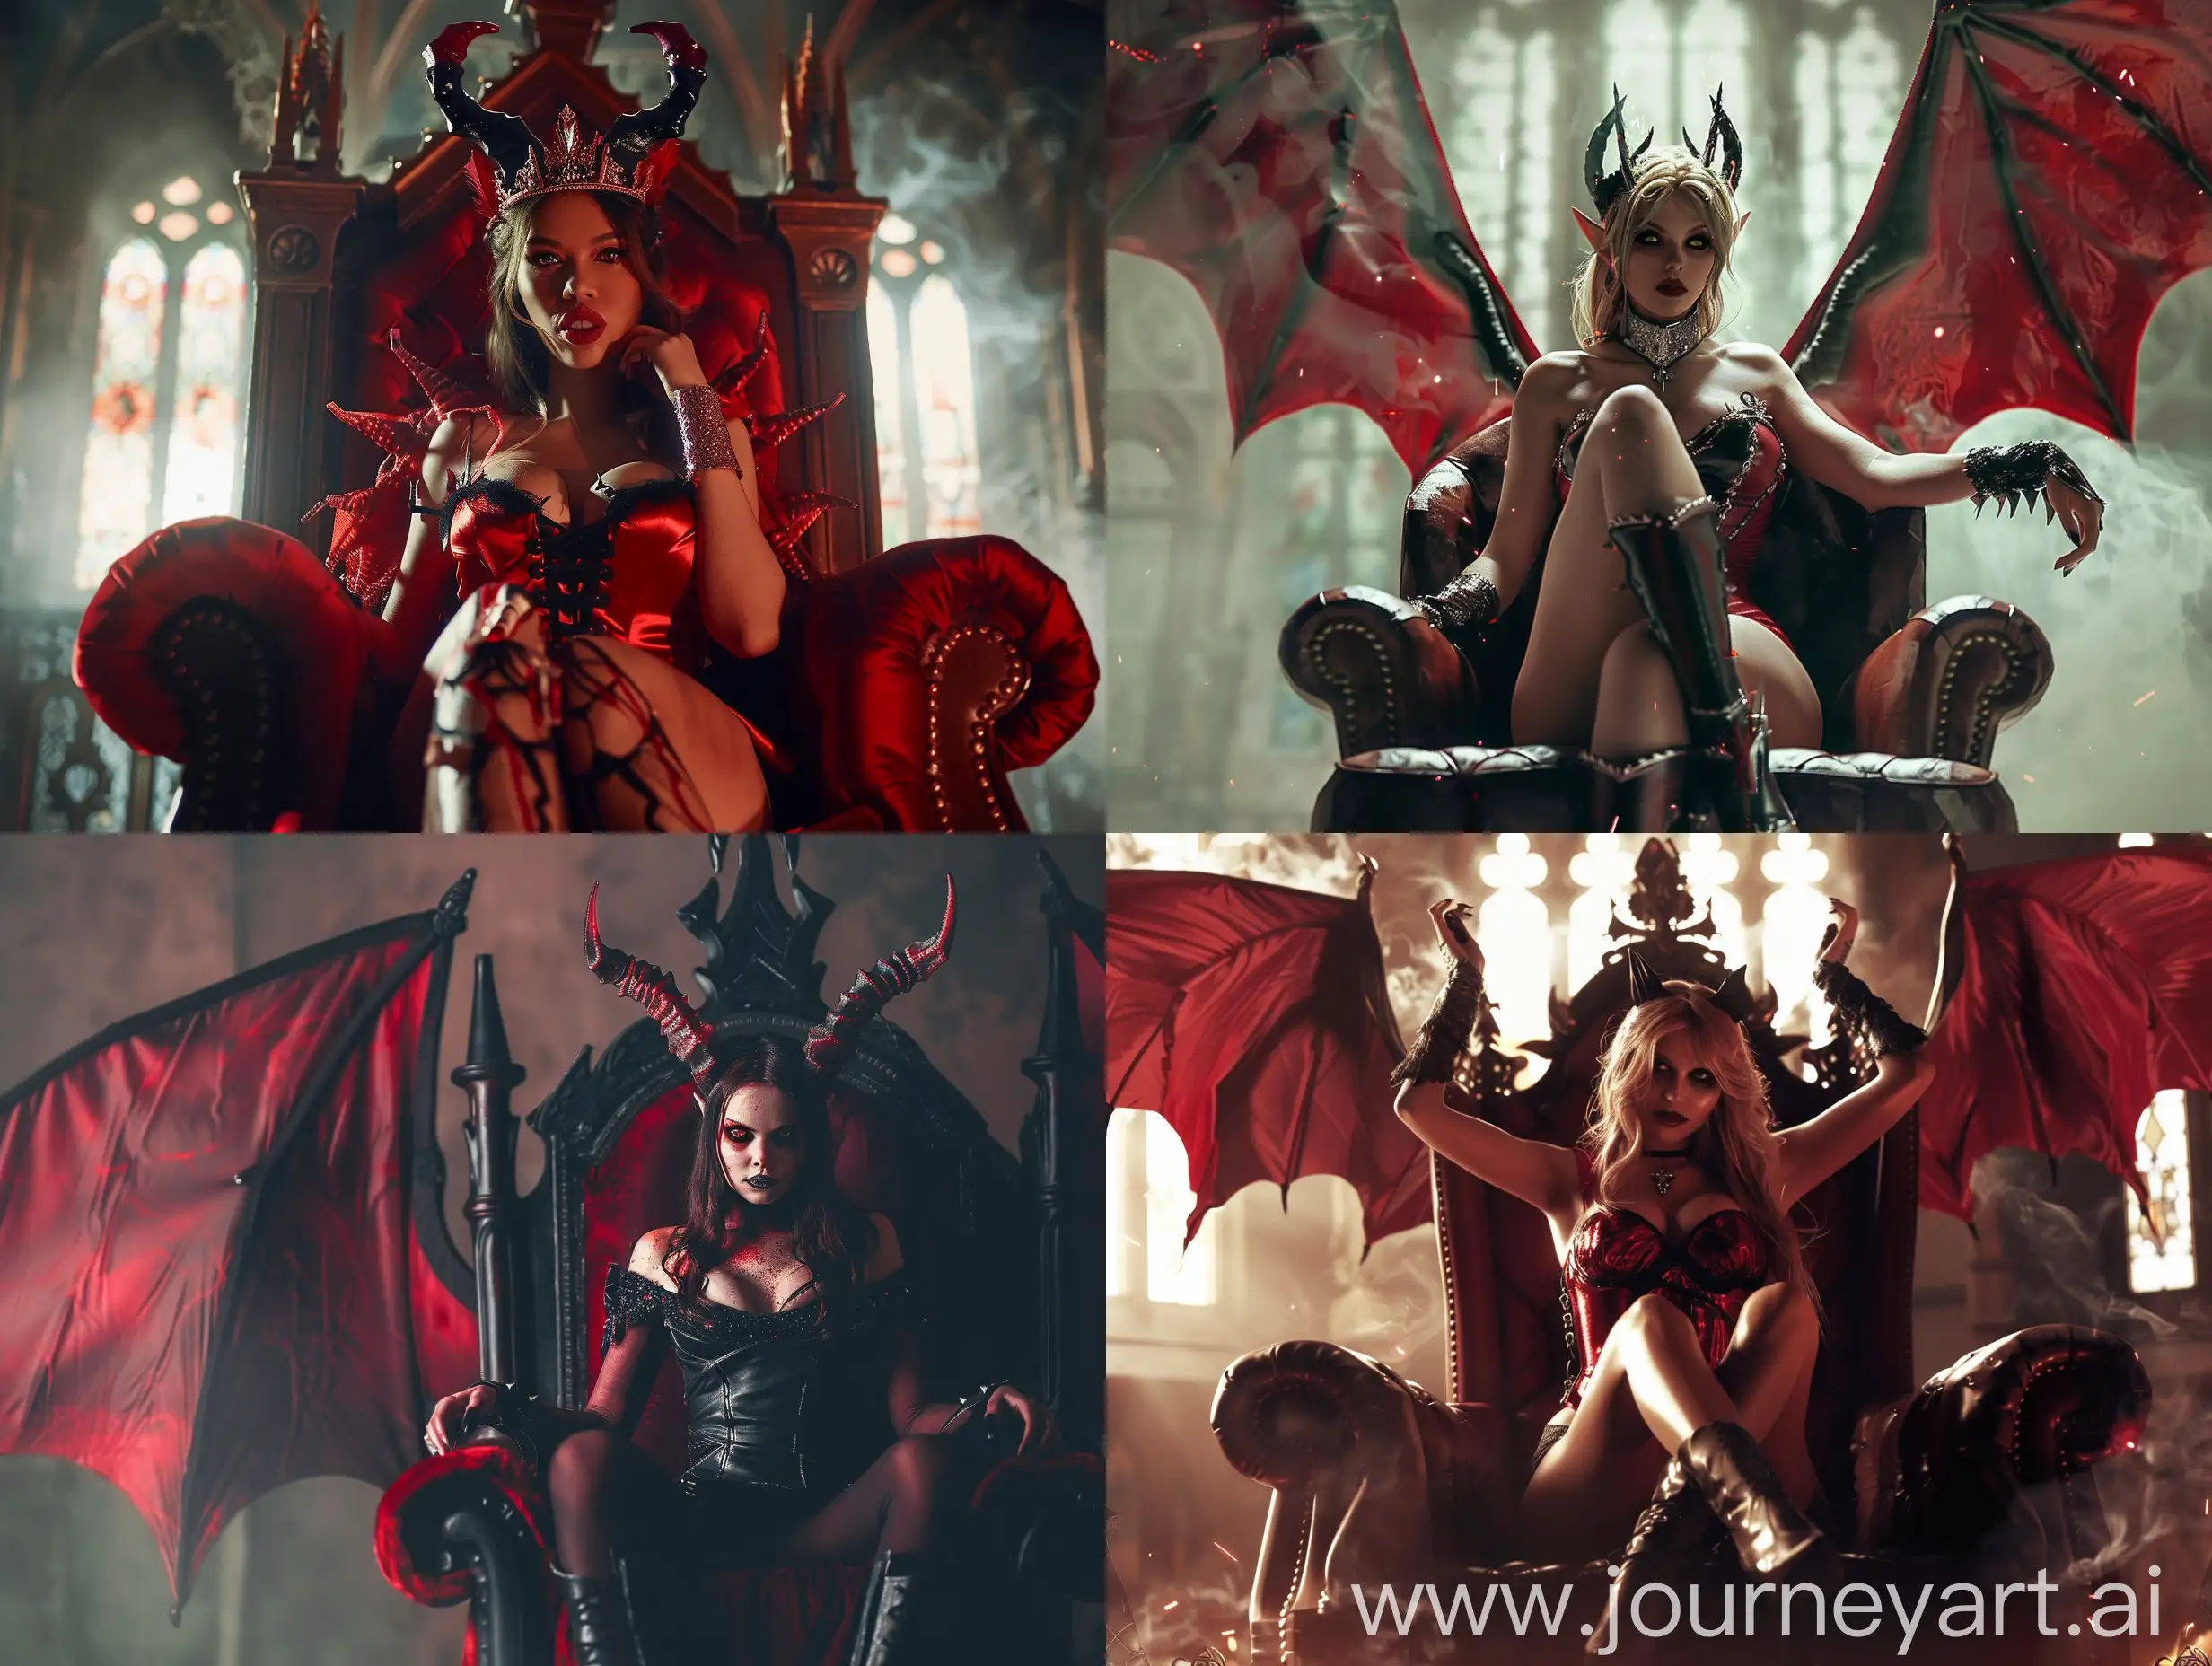 Seductive female demon queen specimen sitting on her throne thirsting for revenge in a cinematic and dramatic scene